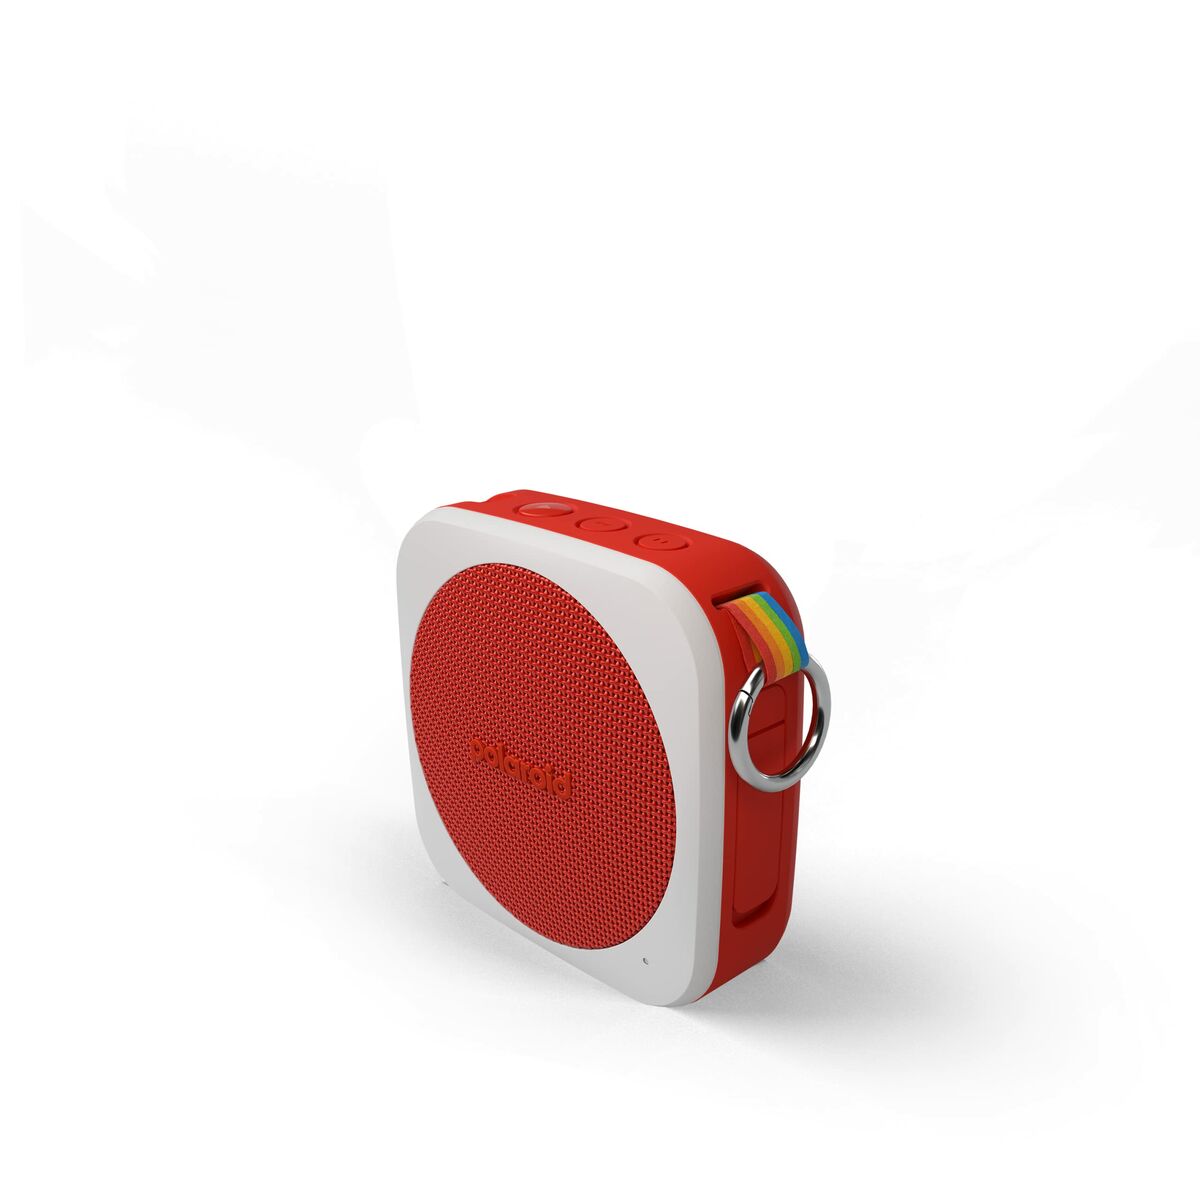 Portable Bluetooth Speakers Polaroid Red, Polaroid, Electronics, Mobile communication and accessories, portable-bluetooth-speakers-polaroid-red, Brand_Polaroid, category-reference-2609, category-reference-2882, category-reference-2923, category-reference-t-19653, category-reference-t-21311, category-reference-t-4036, category-reference-t-4037, Condition_NEW, entertainment, music, Price_50 - 100, RiotNook